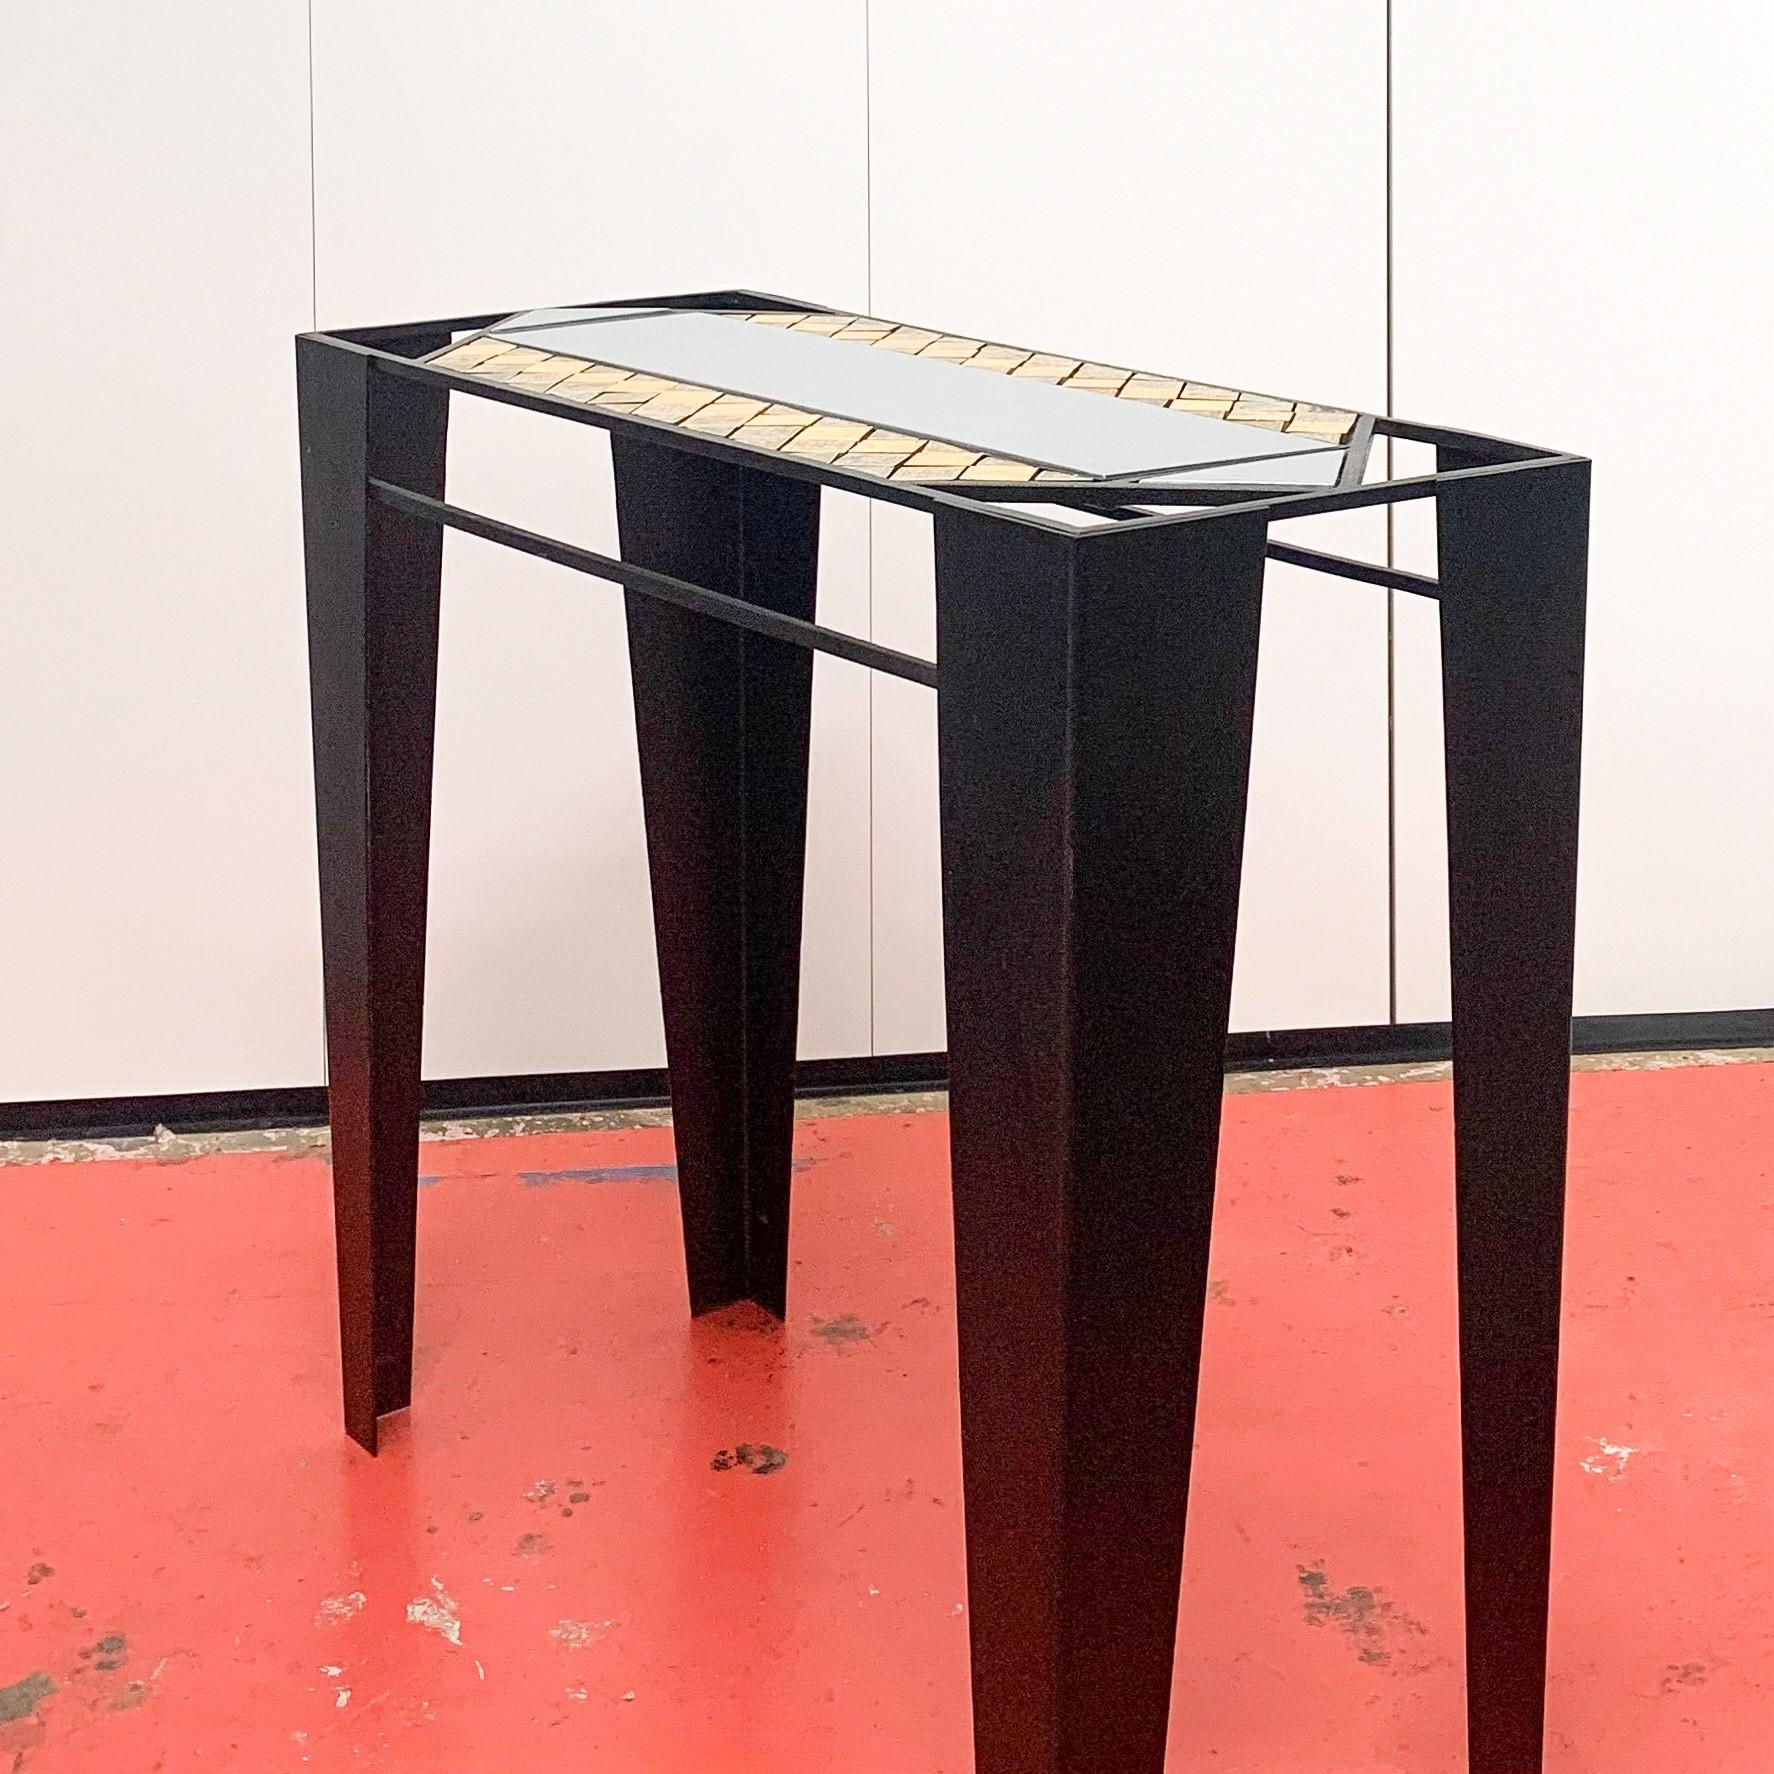 Postmodern console table in iron with glass & tiled top - British, c1990s.